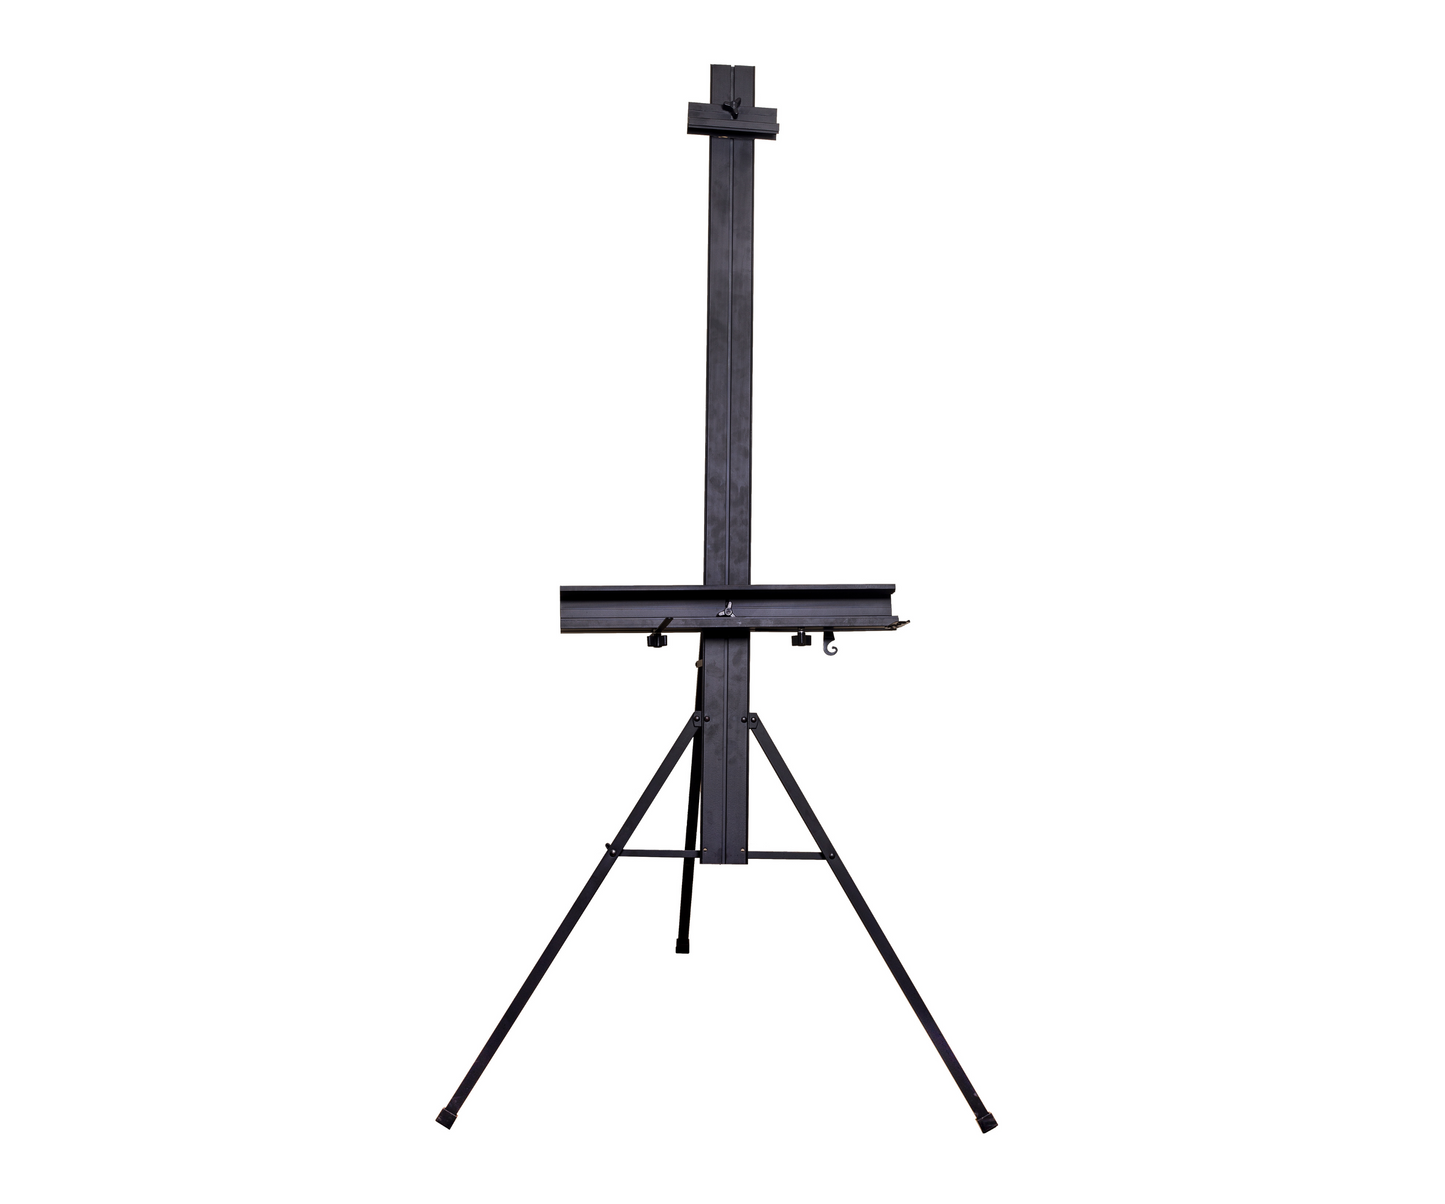 Brustro Artist Heavy Duty Aluminium Metal Easel - Holds canvases Upto 47" inches (Easel Stand for Painting)